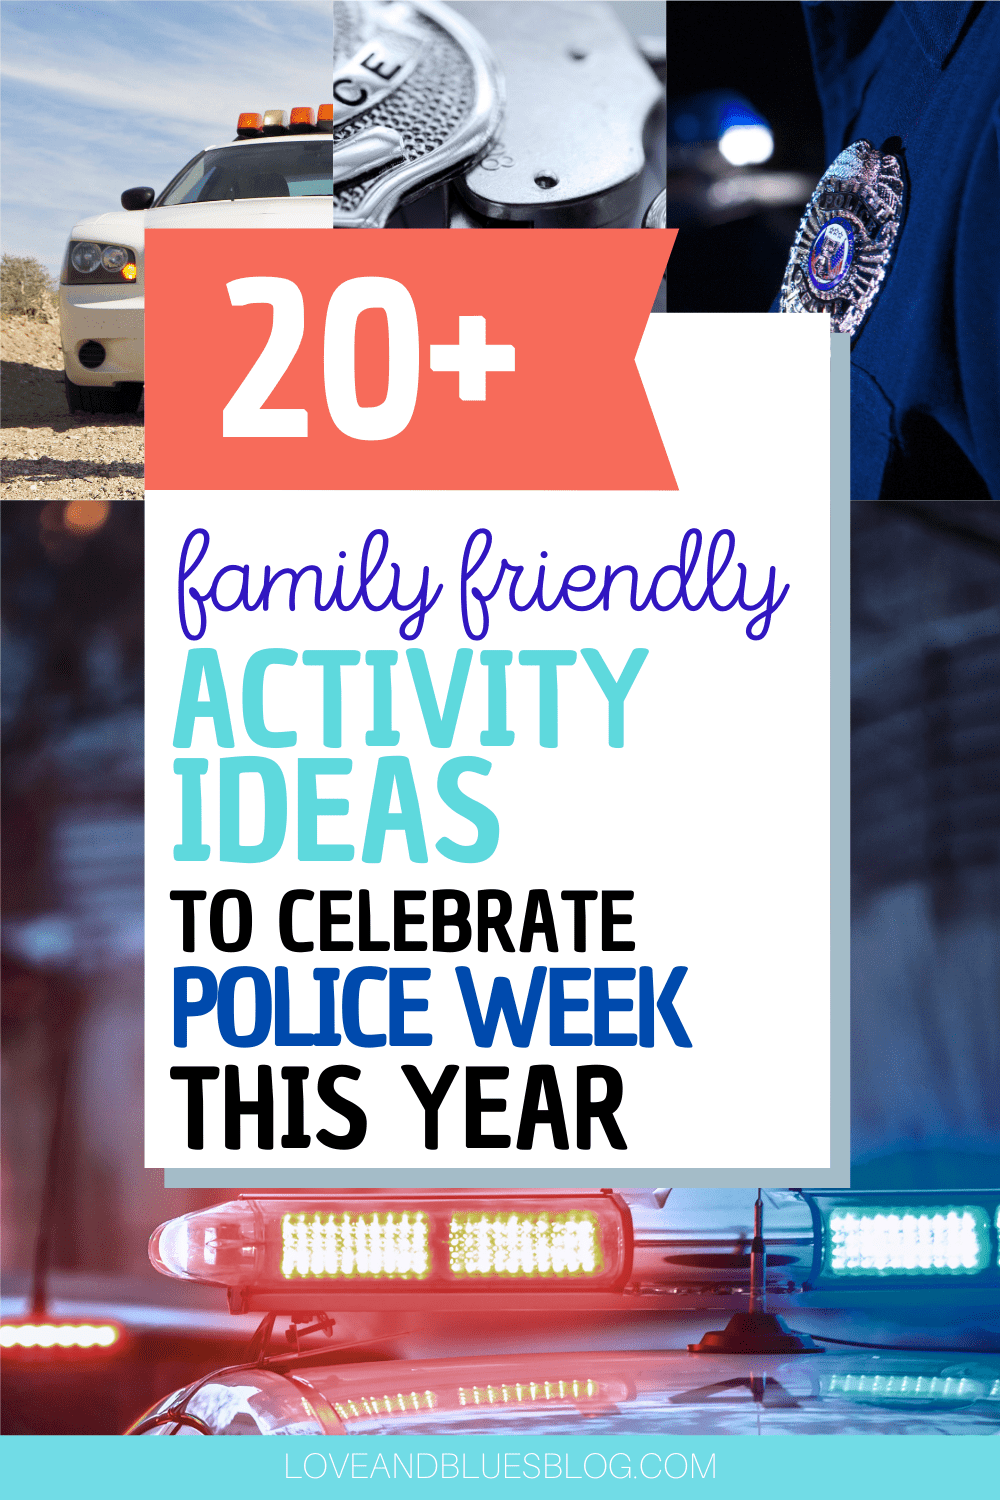 Great ways to celebrate national police week - fun for the whole family!